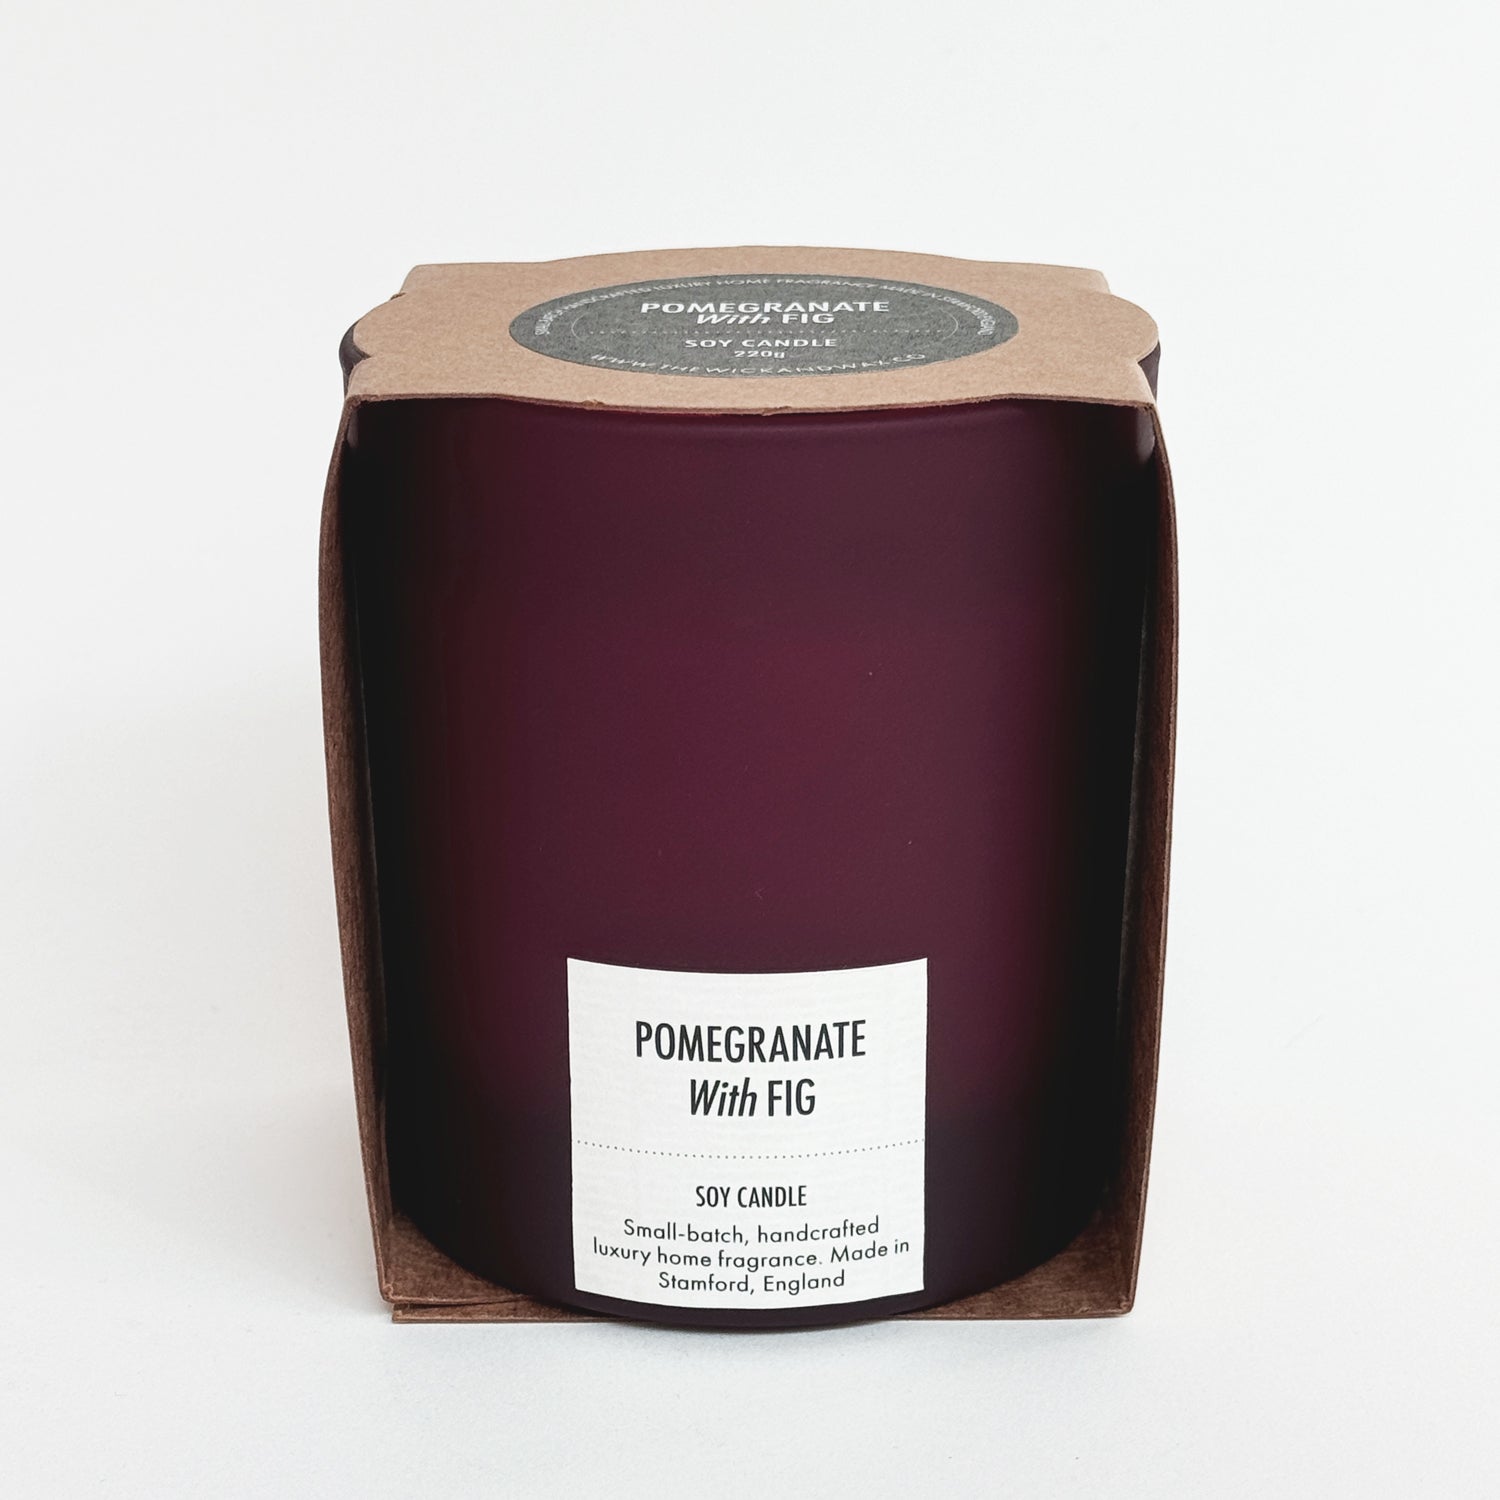 Pomegranate With Fig - Scented Soy Candle